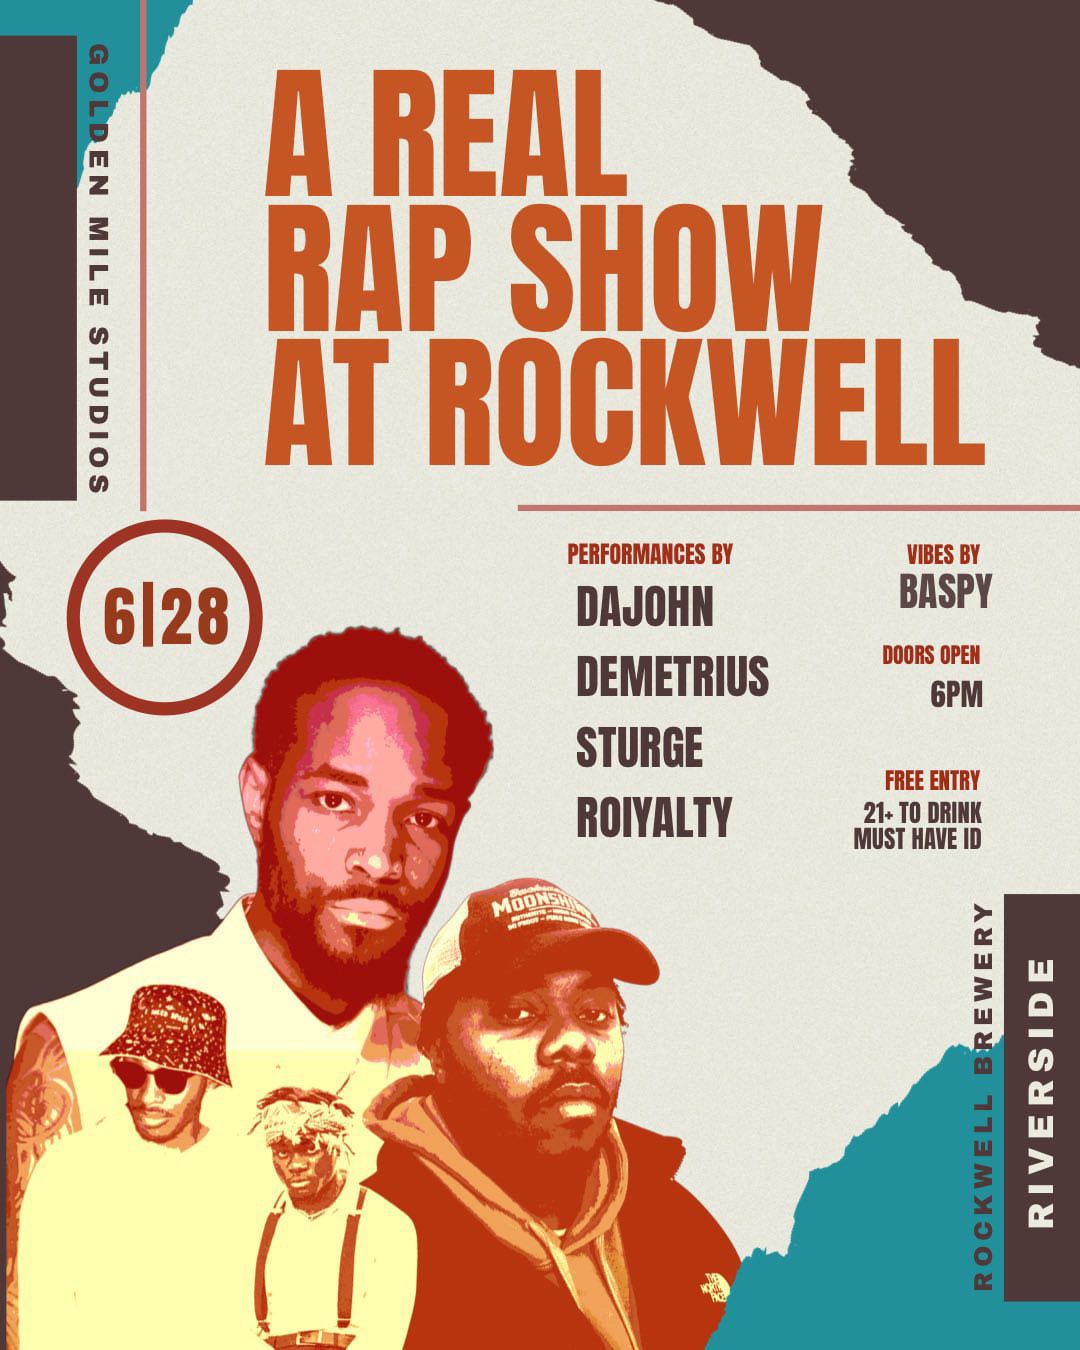 Local Music Showcase - Featuring "A REAL RAP SHOW AT ROCKWELL"